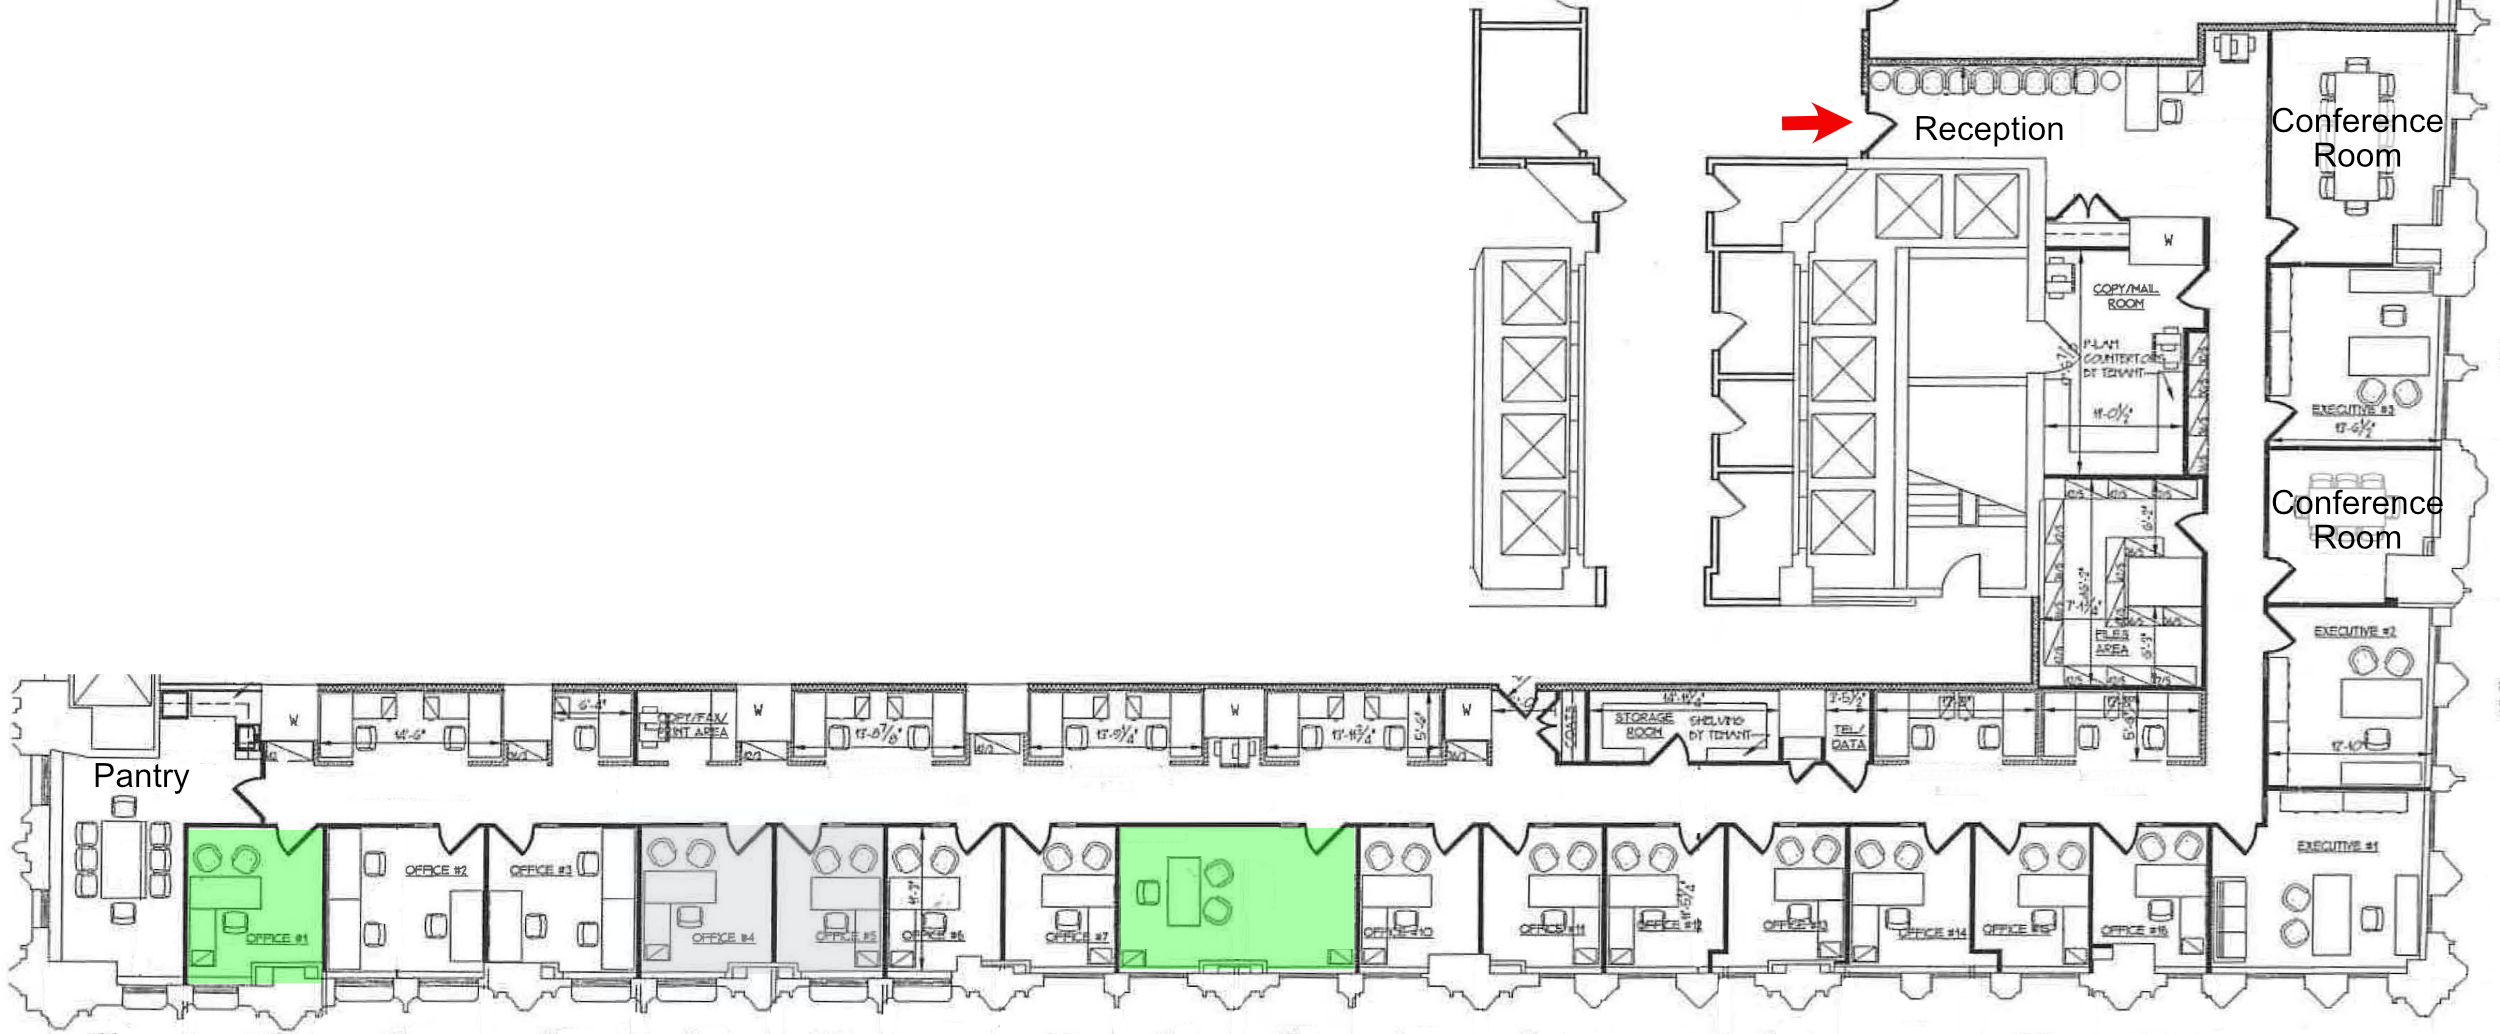 floor plan woolworth building | office sublets